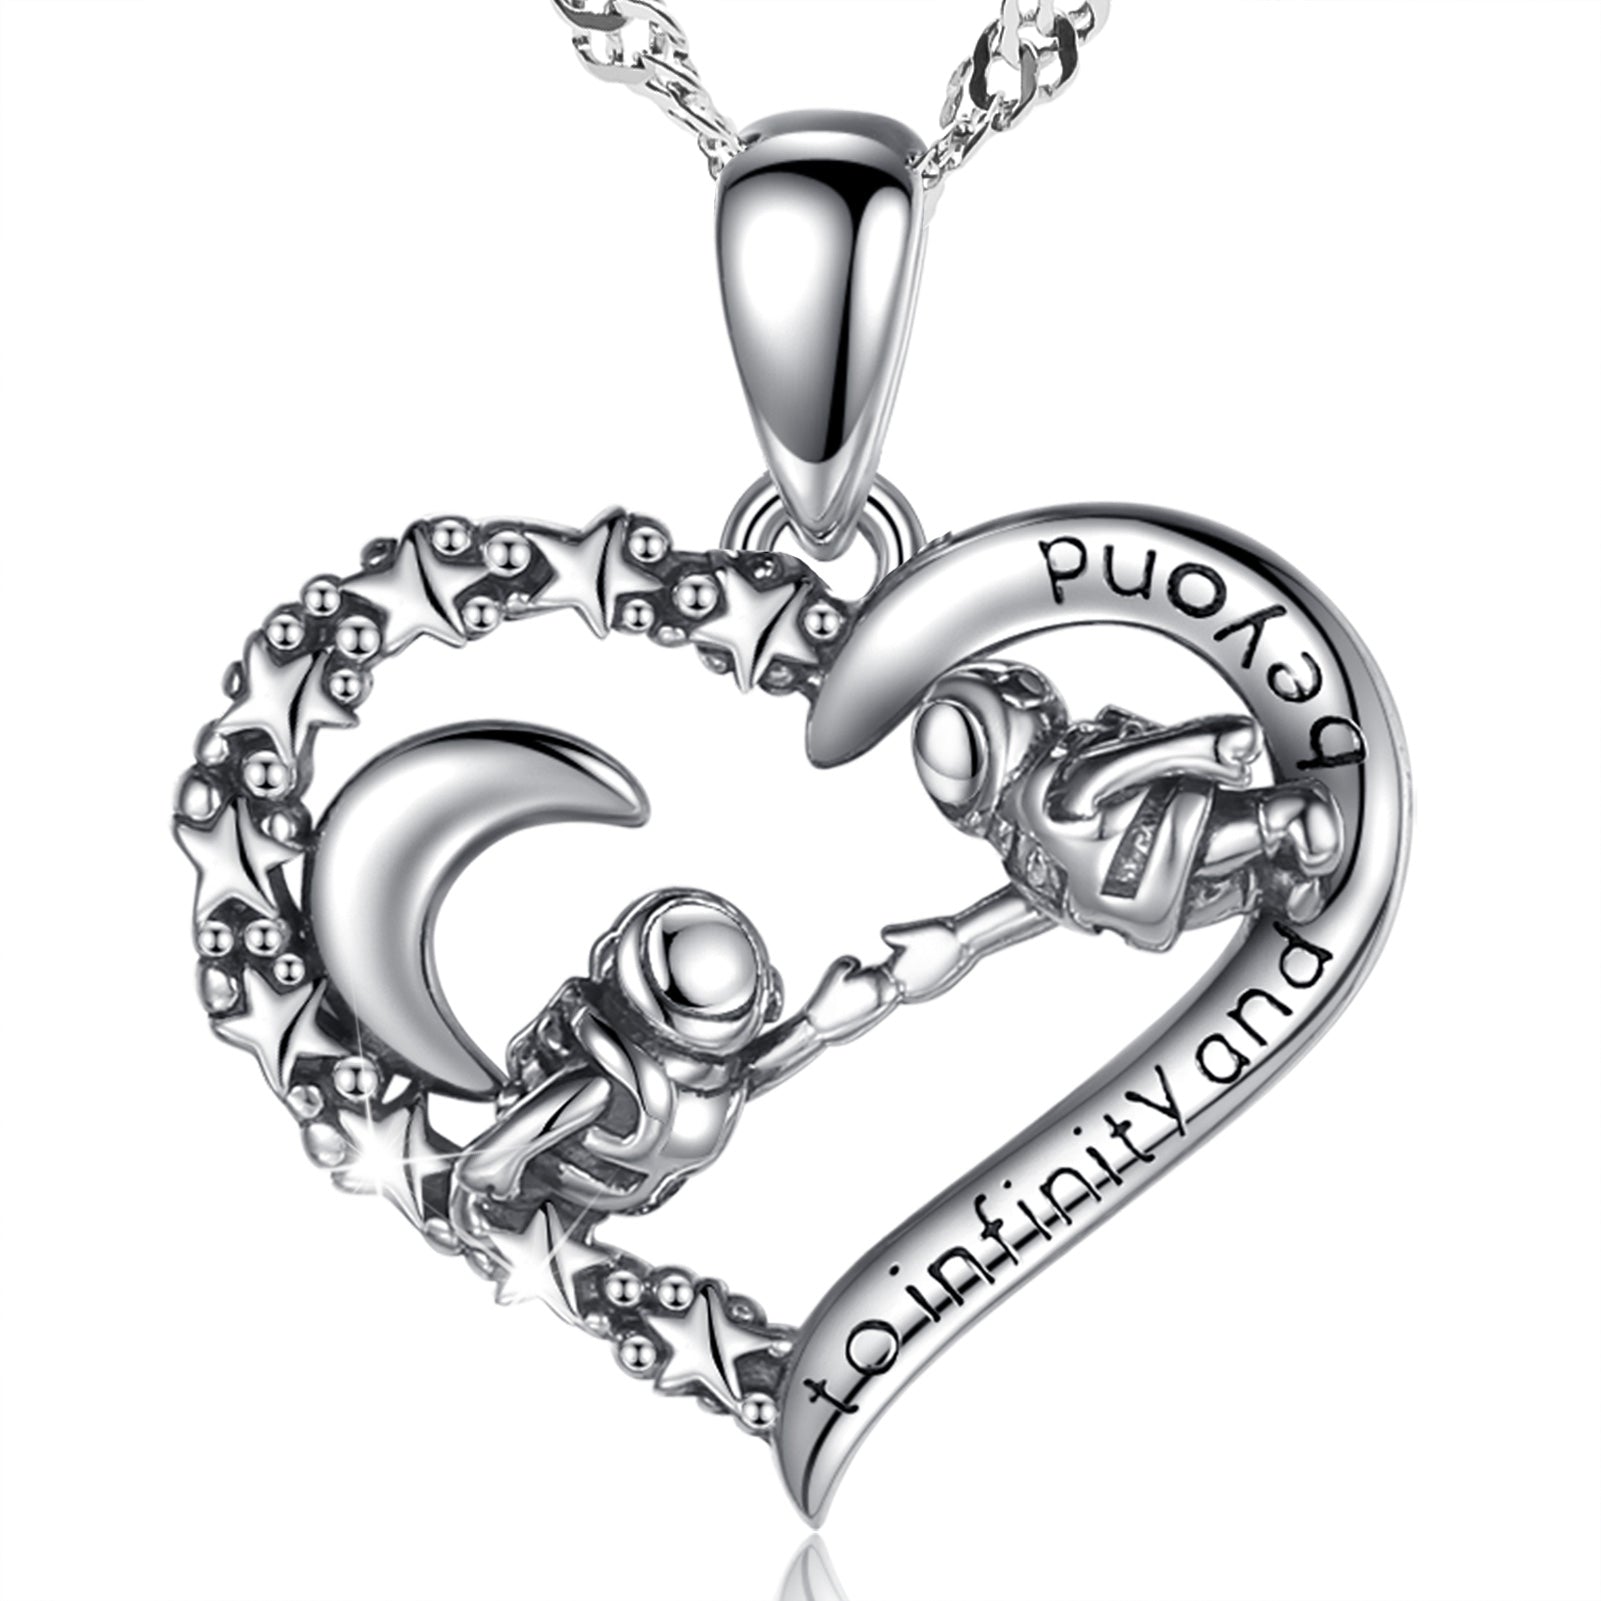 Moon Love Heart pendant with 925 Sterling Silver Water Wave necklace chain 18"